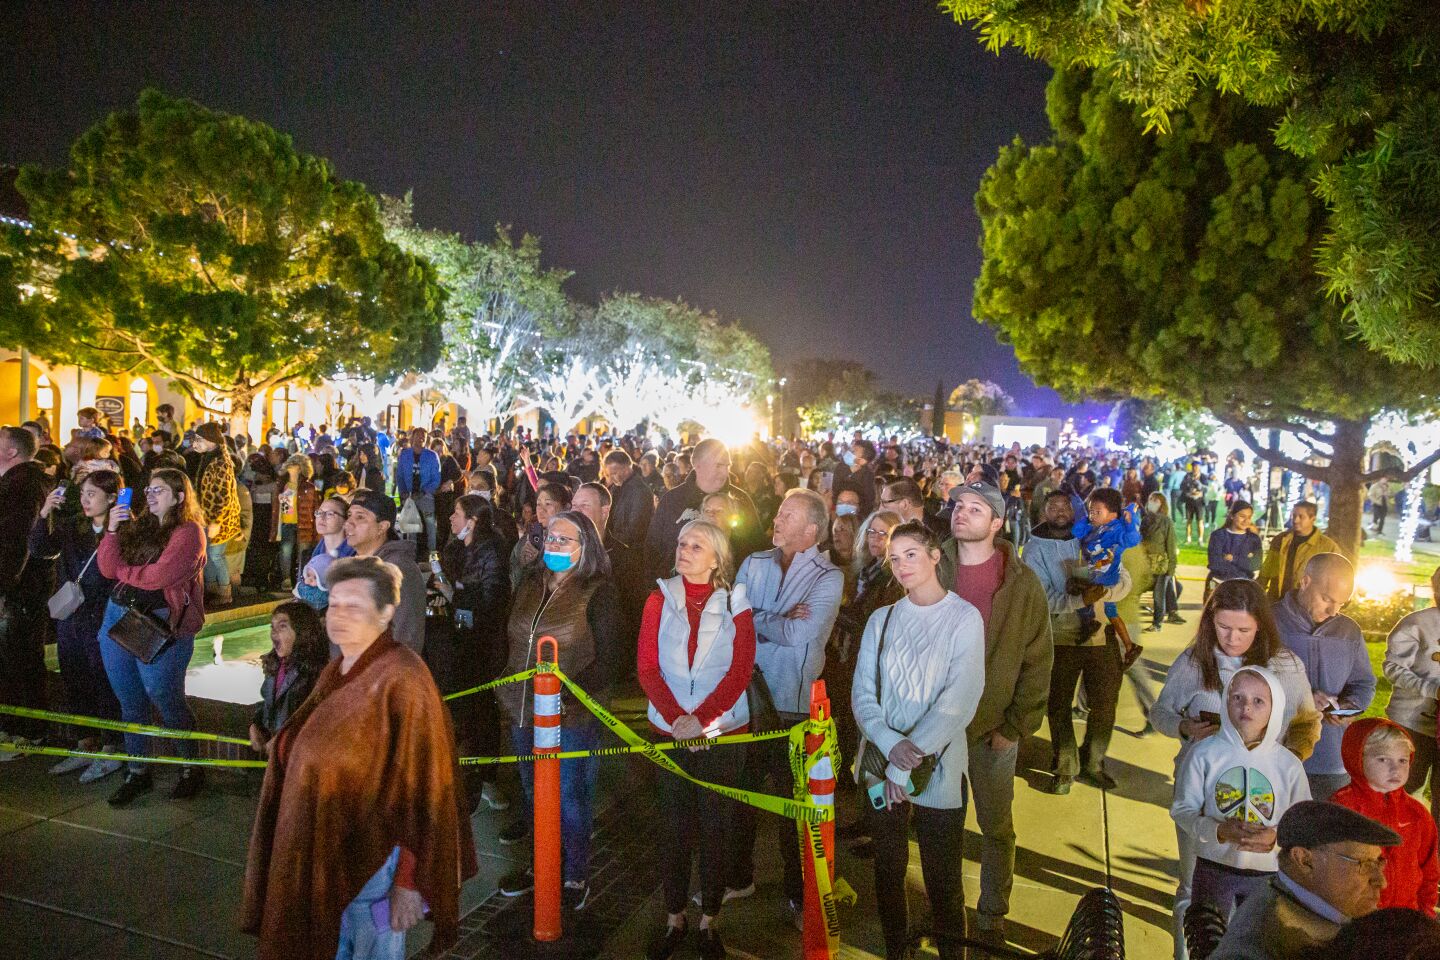 People eager to kick off the holidays with Liberty Station's tree lighting stretch along the North Promenade on Nov. 26.